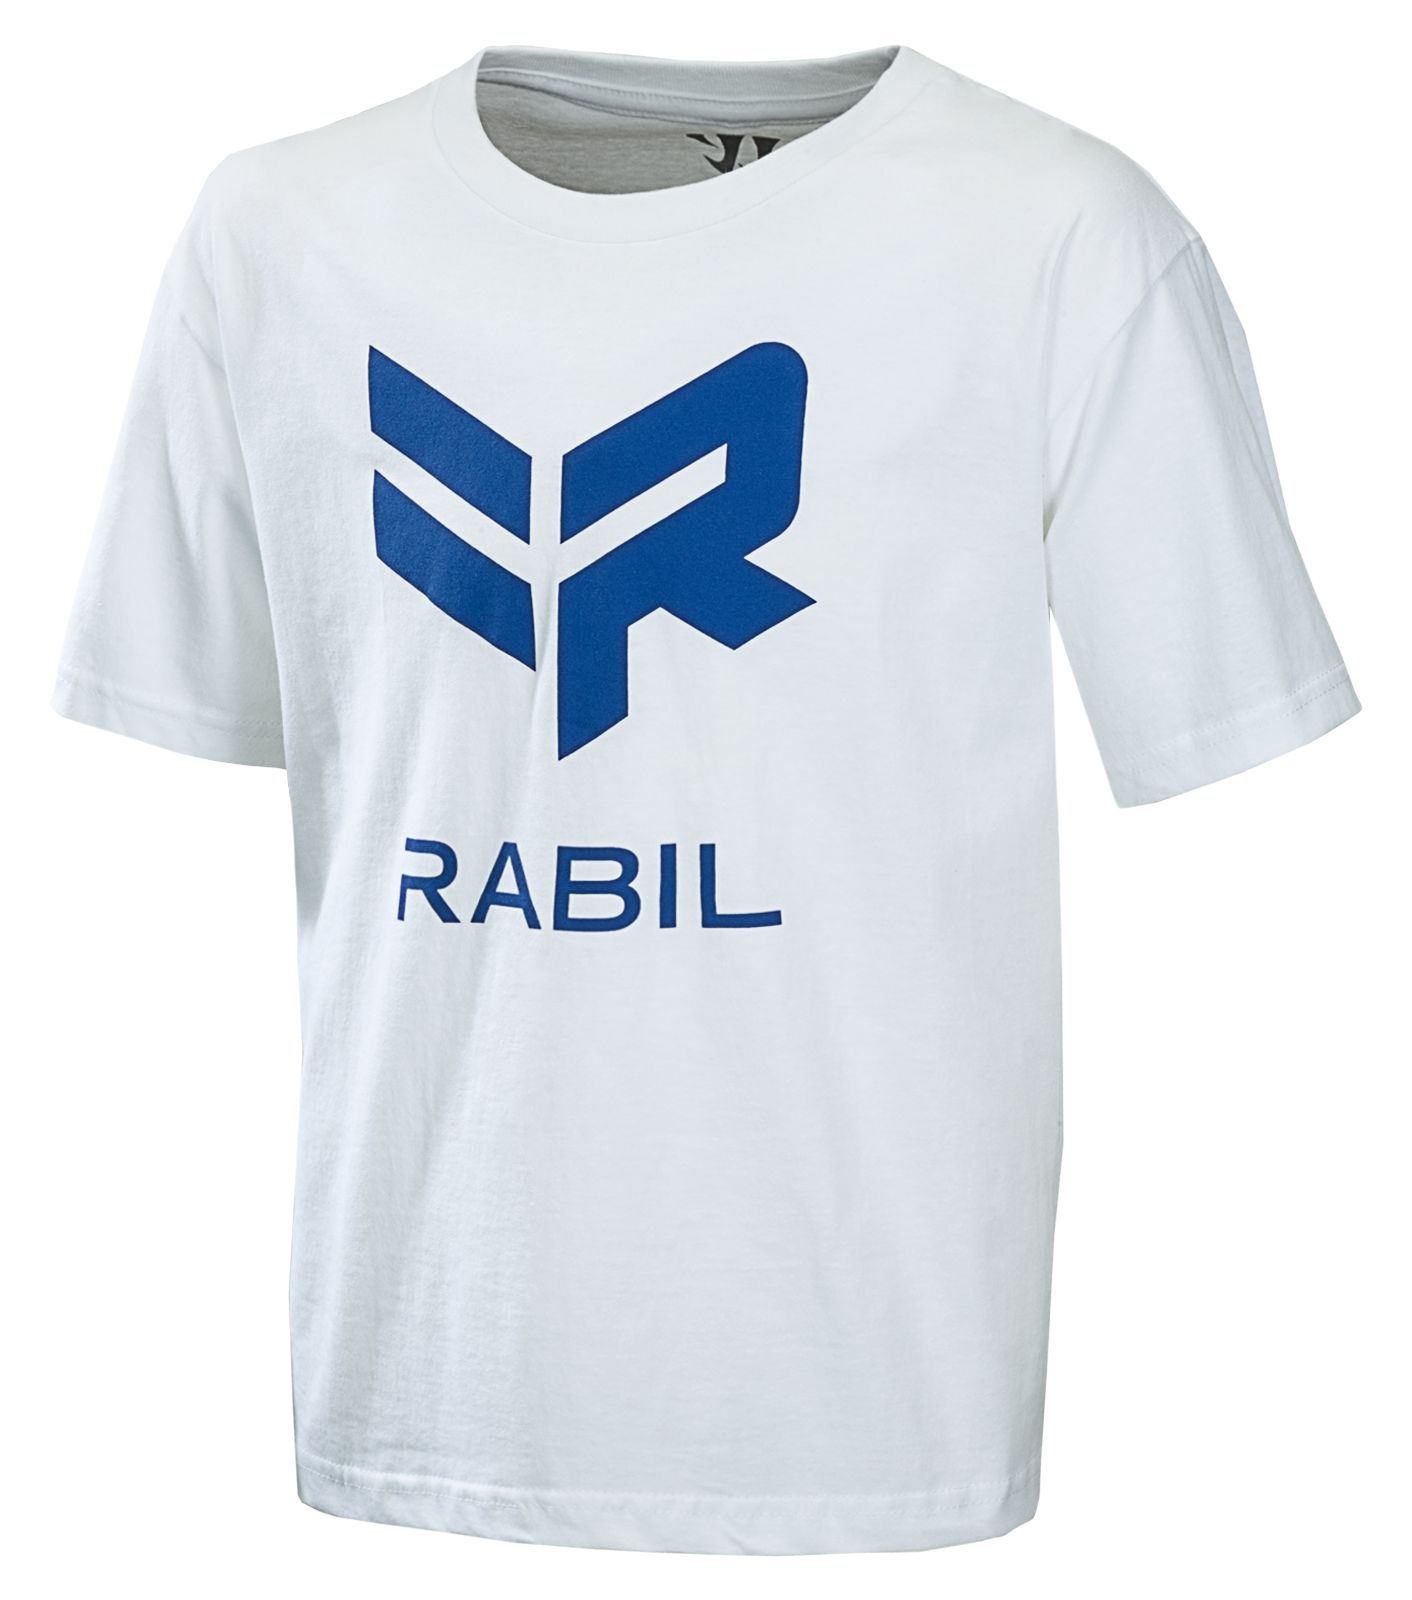 Youth Rabil Tee, White image number 1